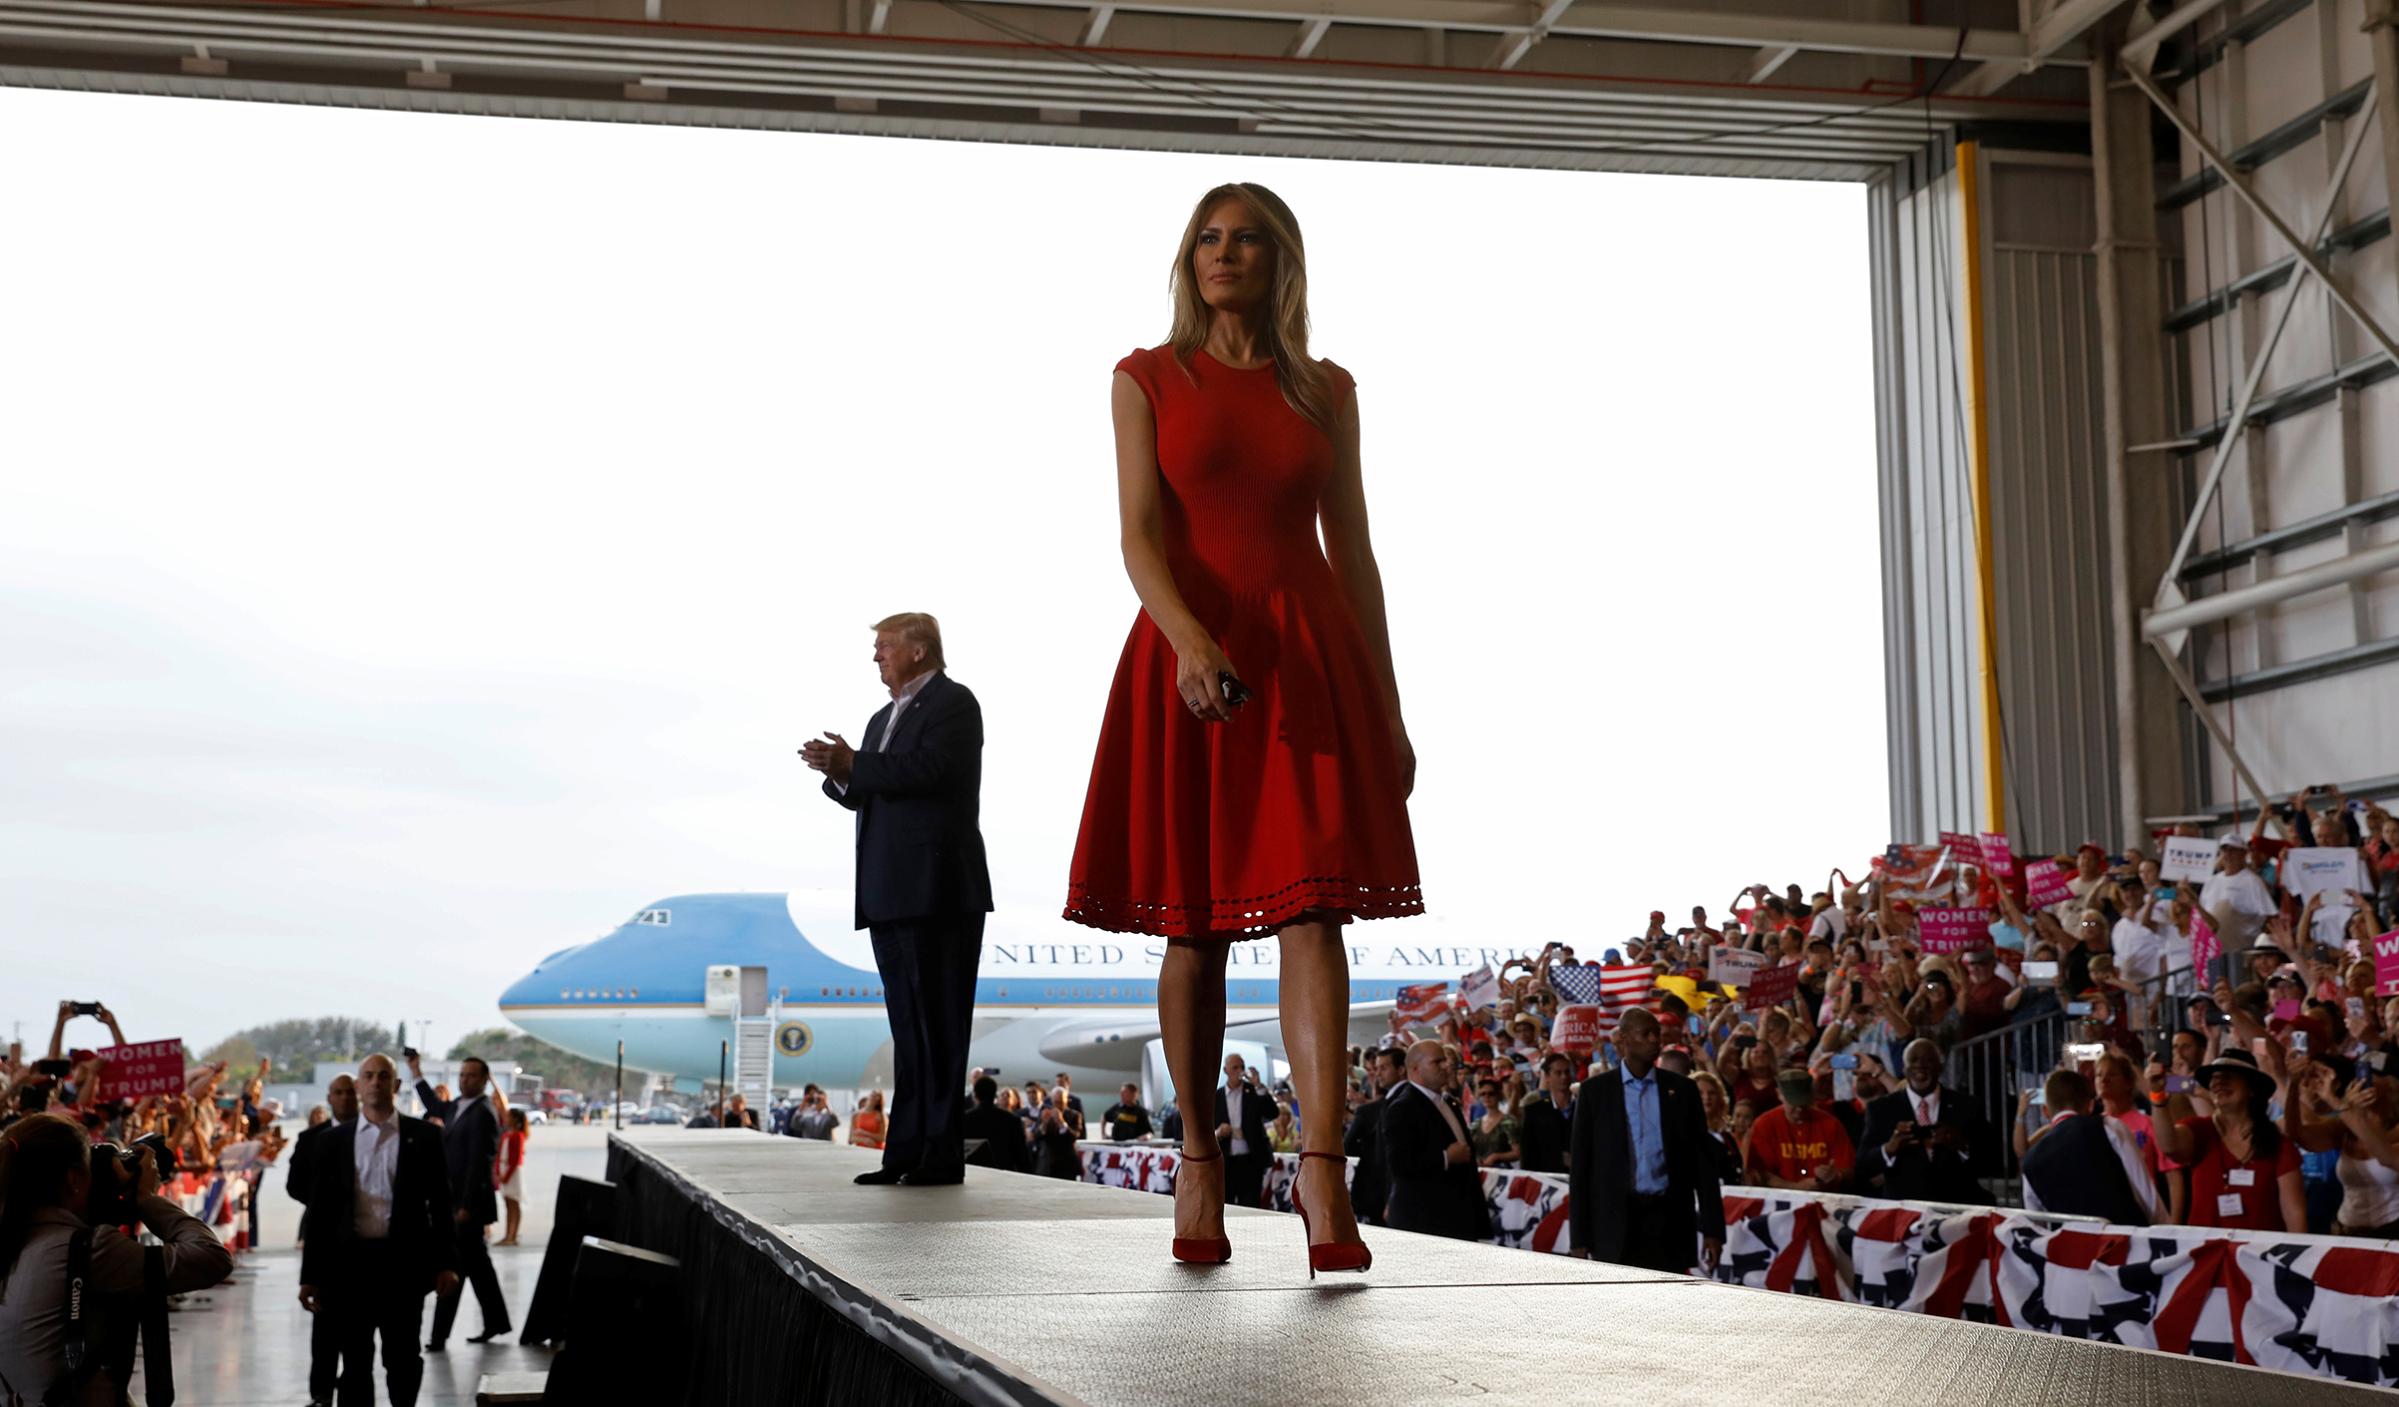 President Donald Trump and first lady Melania Trump wearing Alexander McQueen red dress, arrive at a "Make America Great Again" rally at Orlando-Melbourne International Airport in Melbourne, Florida, U.S. February 18, 2017.